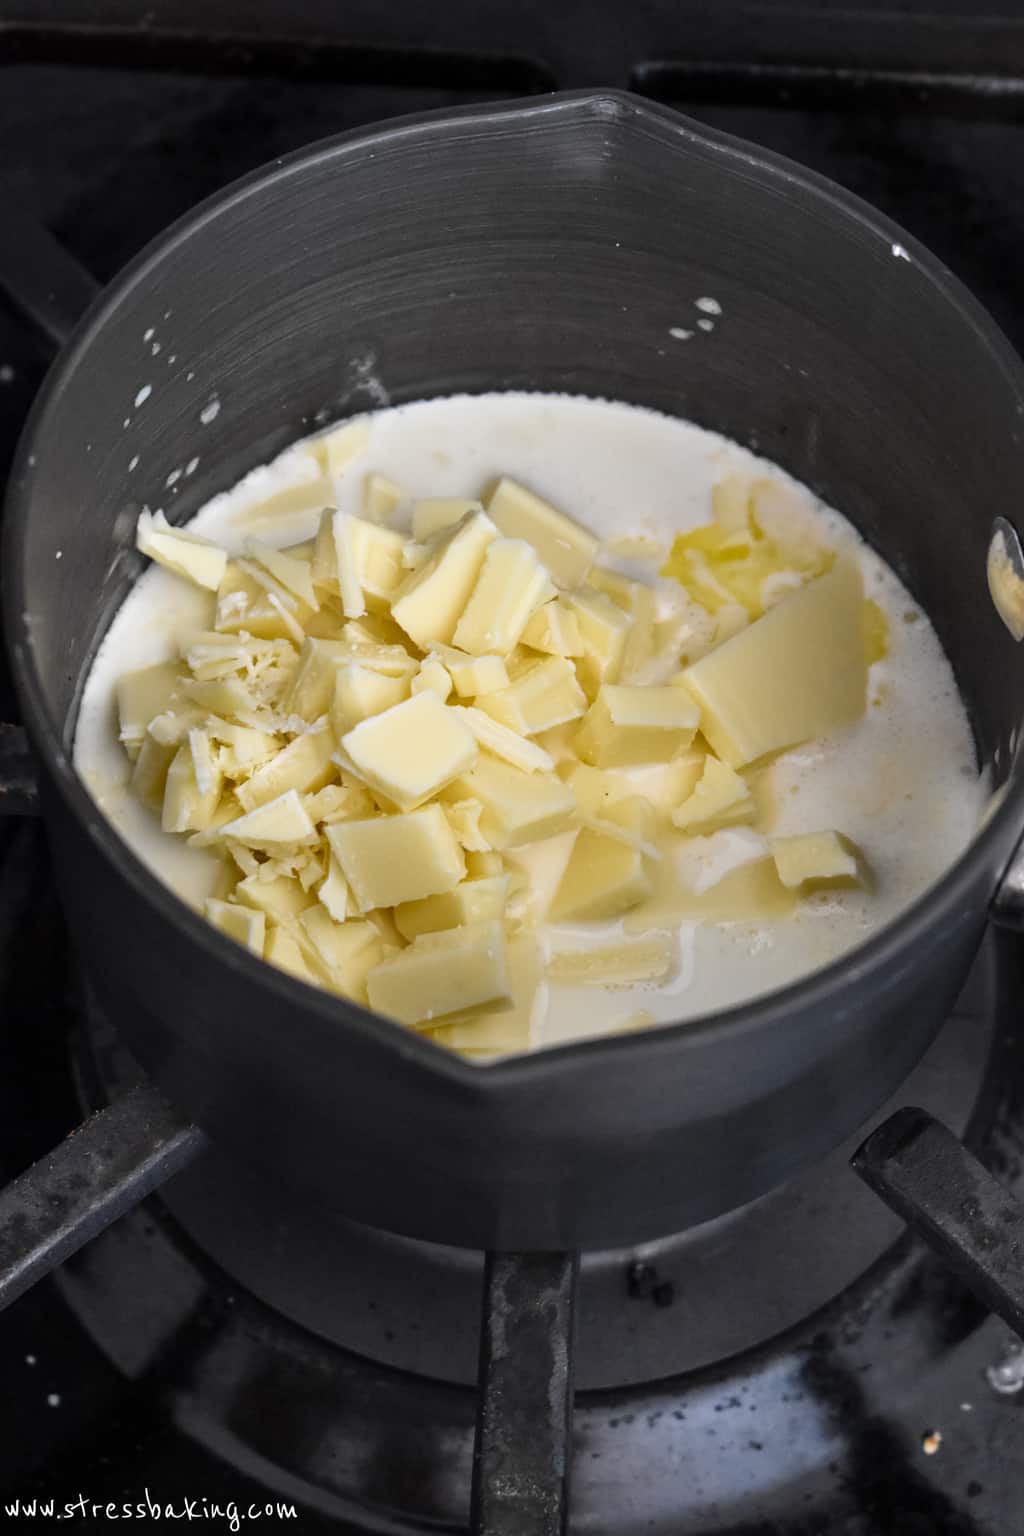 Chopped white chocolate, butter and heavy cream in a small saucepan